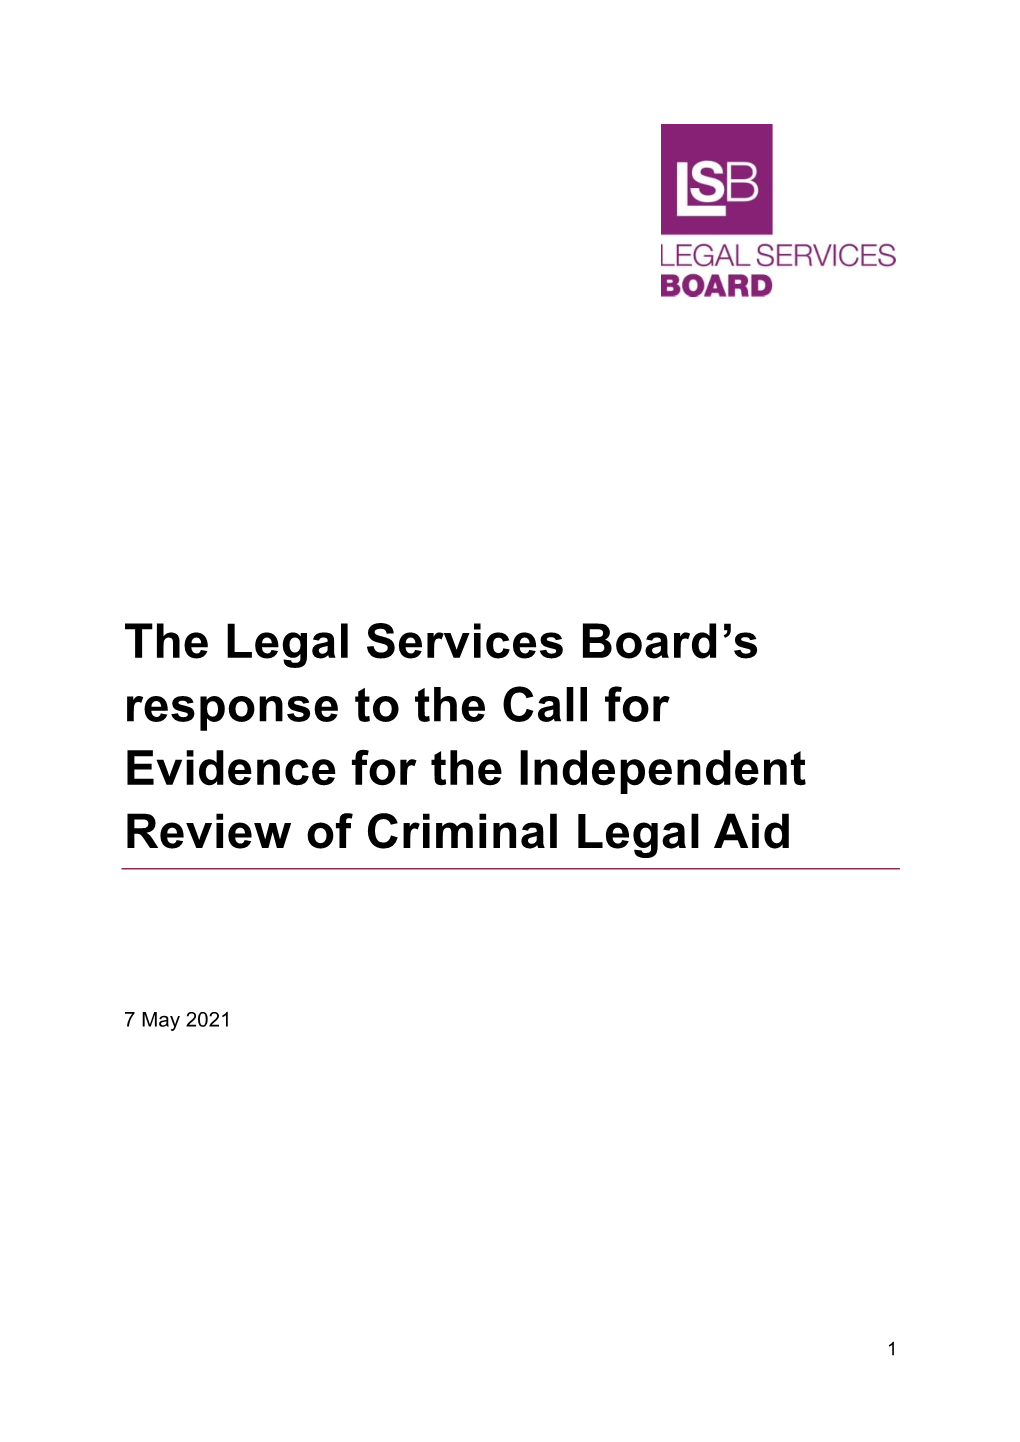 LSB Submission to CLAR Call for Evidence 20210506